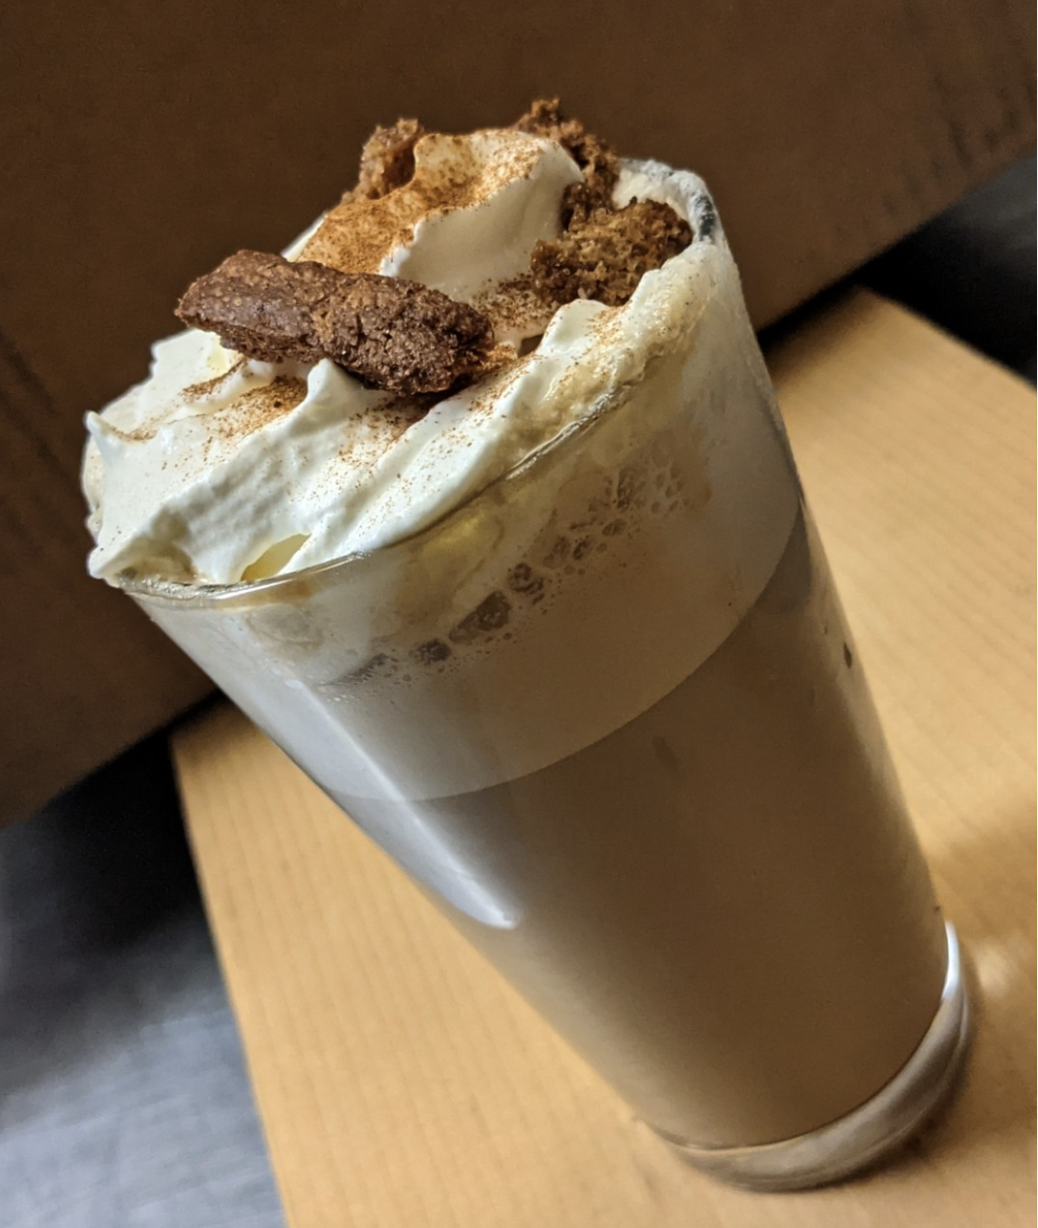 "Snickerdoodle Latte" Creamy Cinnamon and brown sugar topped with whipped cream and caramel